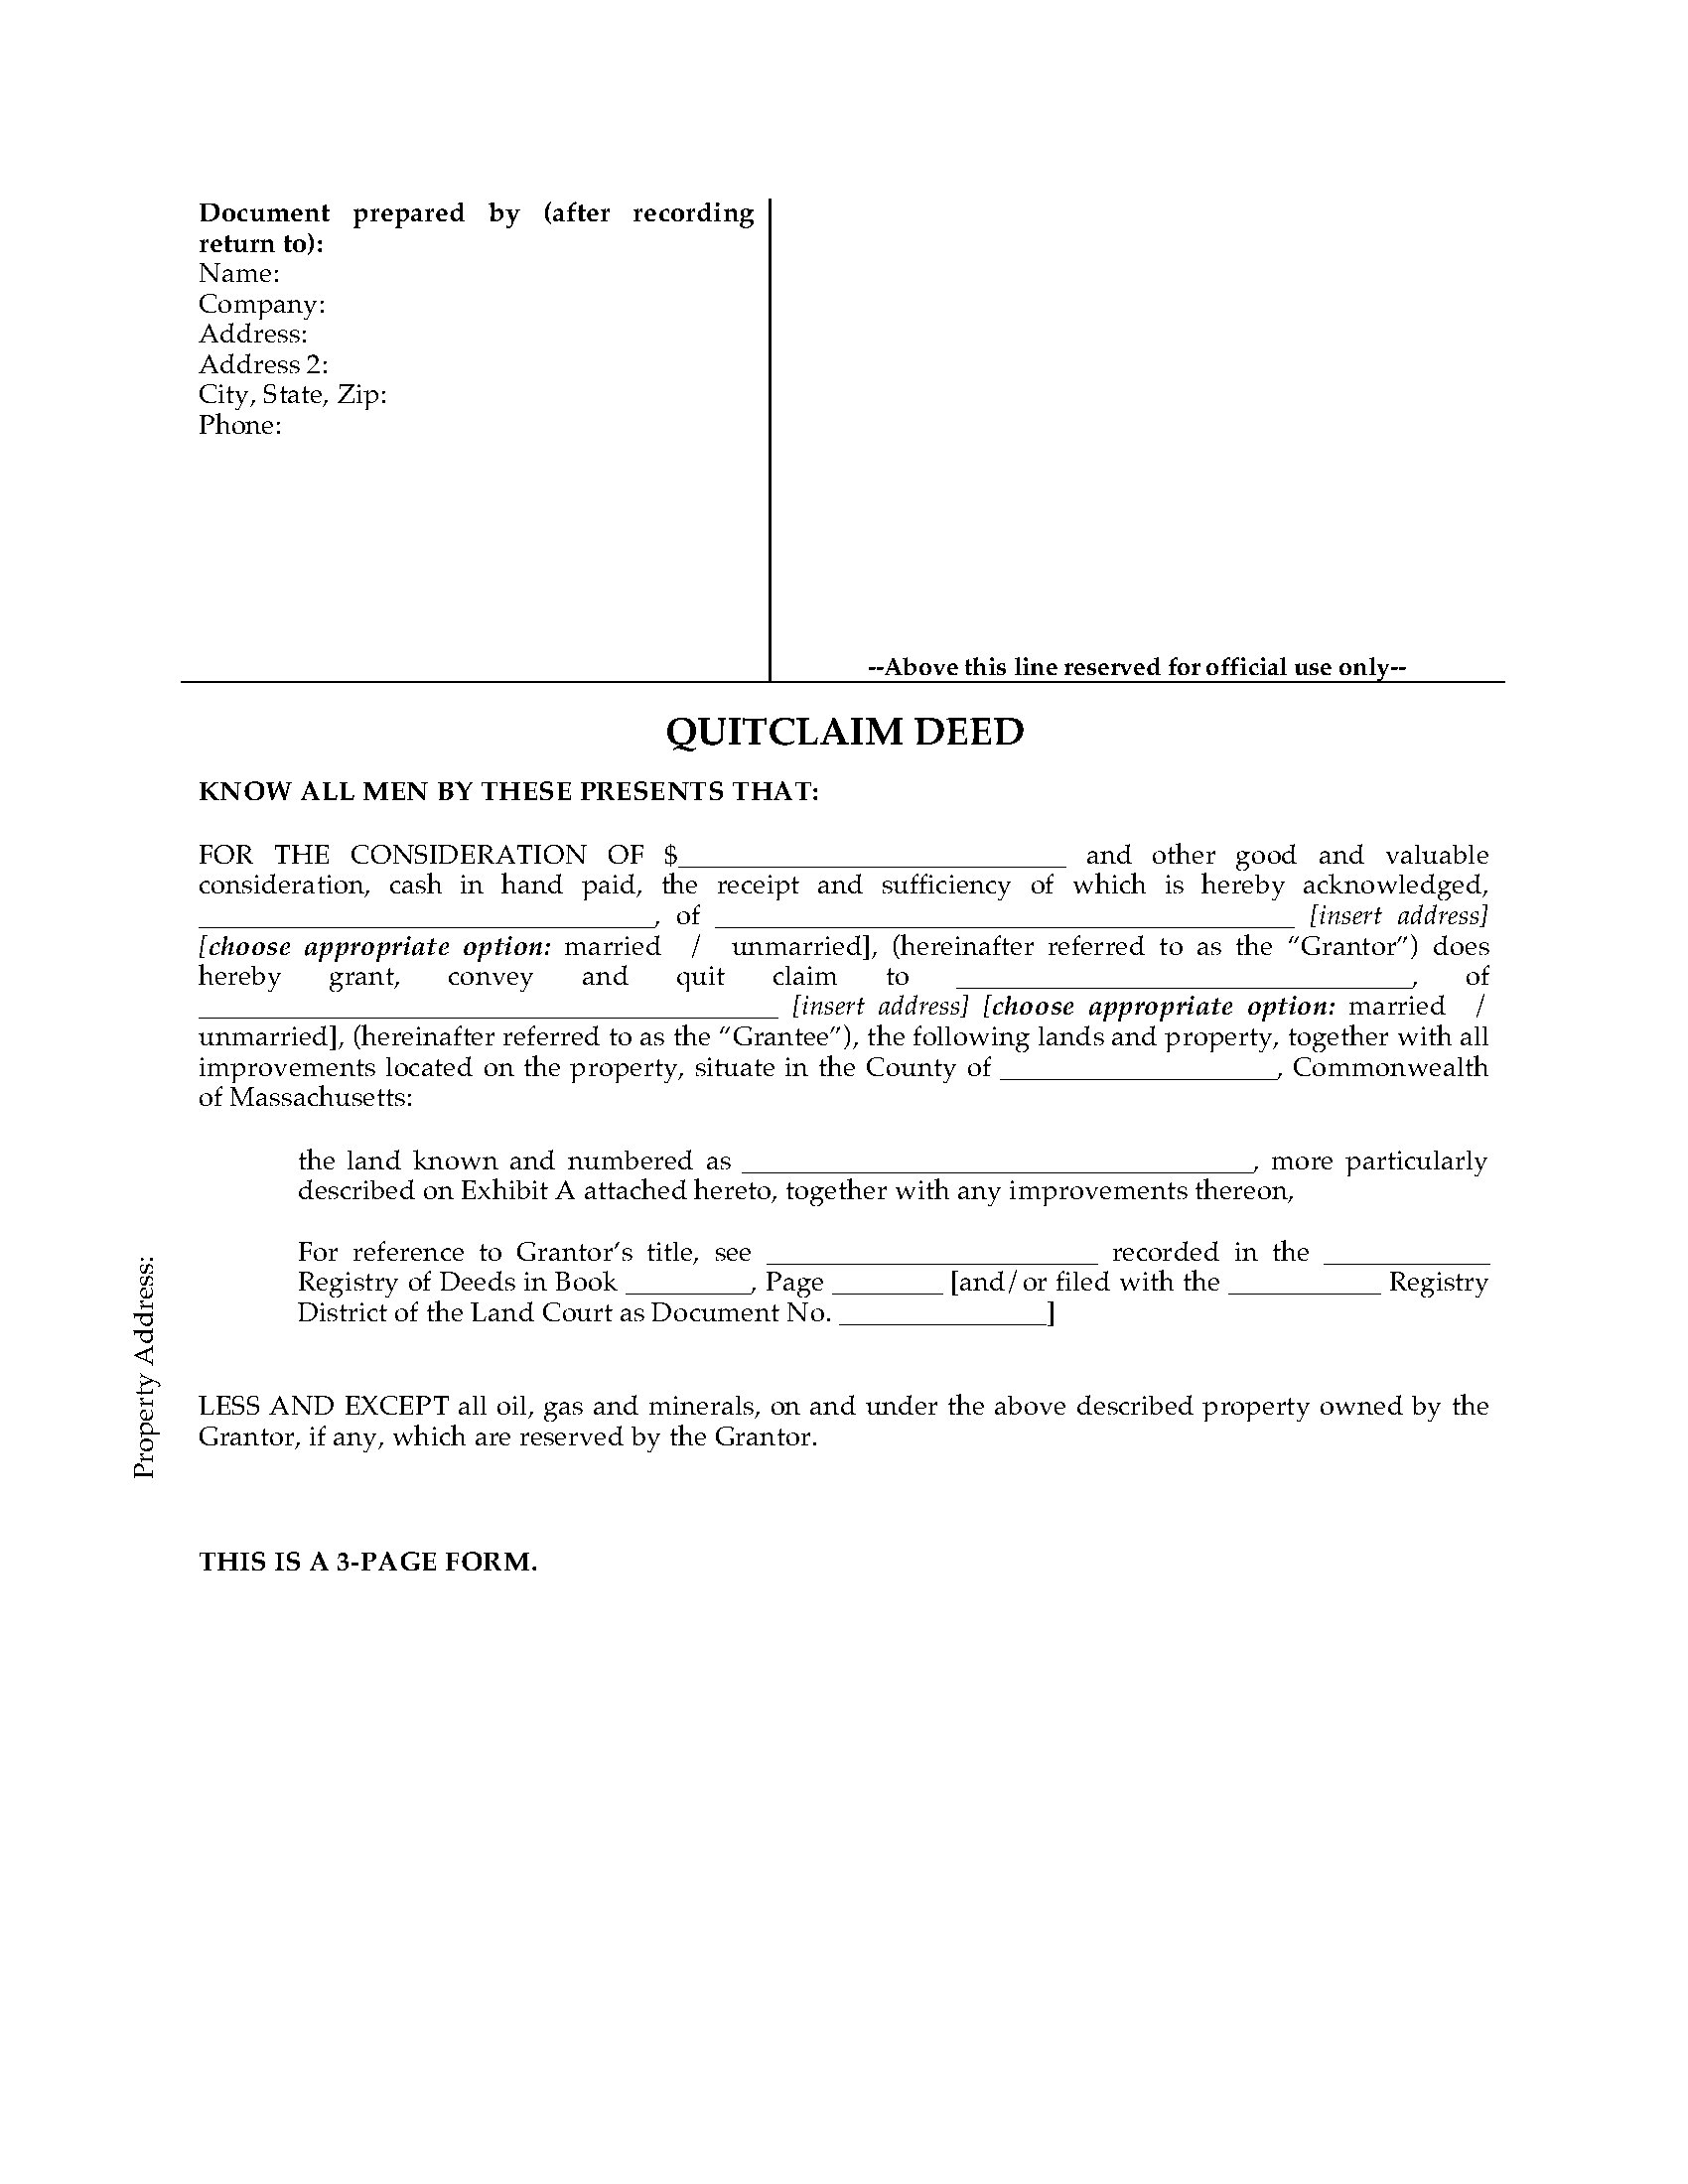 massachusetts-quitclaim-deed-form-legal-forms-and-business-templates